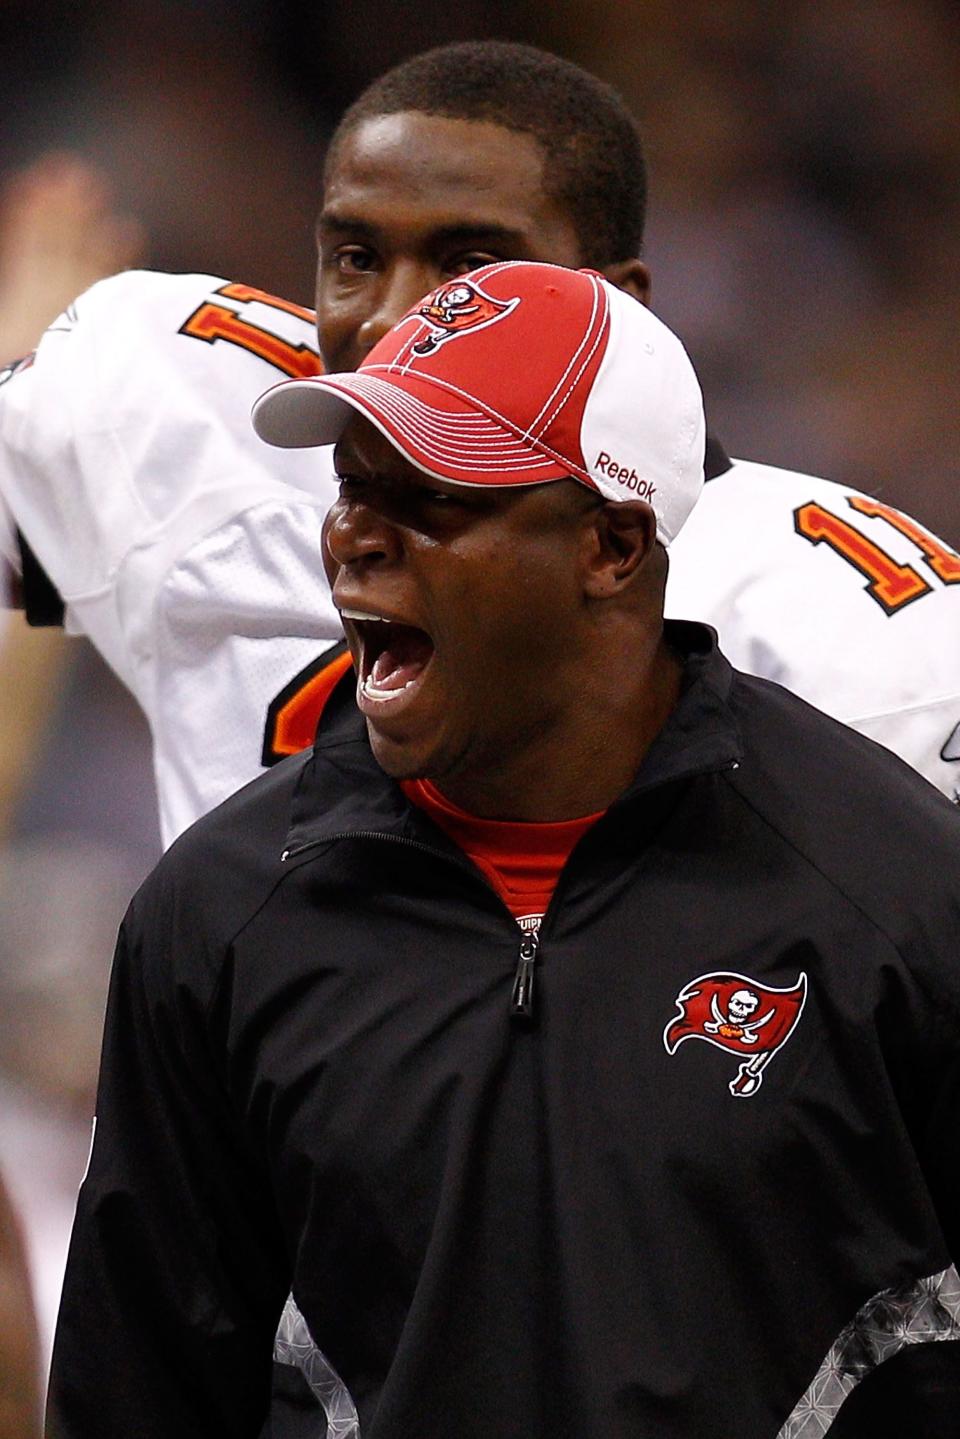 NEW ORLEANS, LA - JANUARY 02:  Head coach Raheem Morris of the Tampa Bay Buccaneers celebrates after a touchdown during the game against the New Orleans Saintsat the Louisiana Superdome on January 2, 2011 in New Orleans, Louisiana.  (Photo by Chris Graythen/Getty Images)